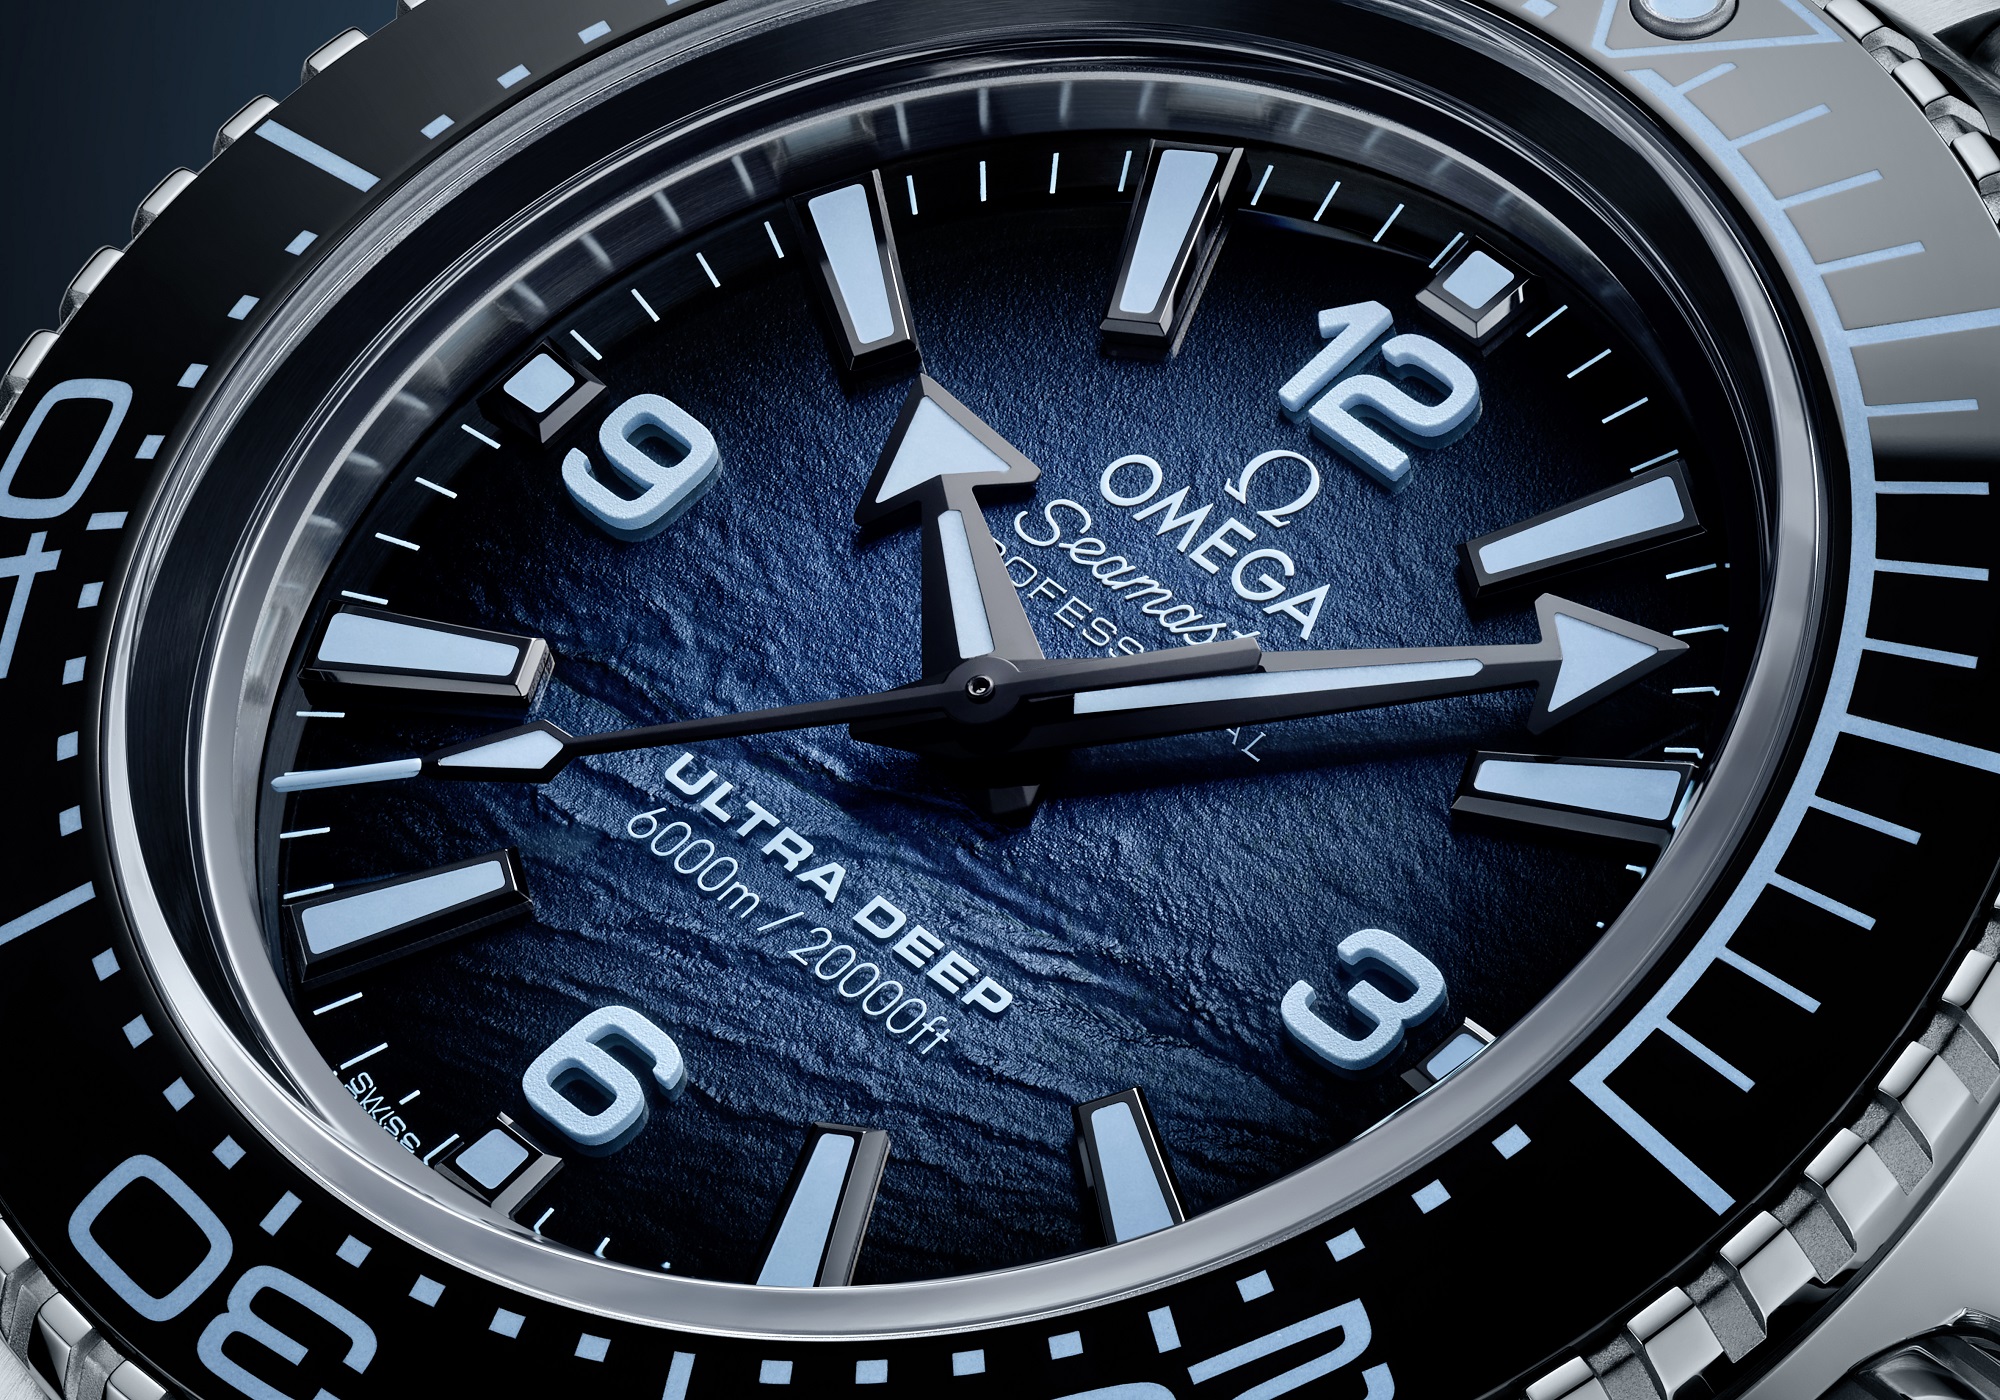 Unboxing the Omega Seamaster Diver 300M James Bond 60th Anniversary -  YouTube